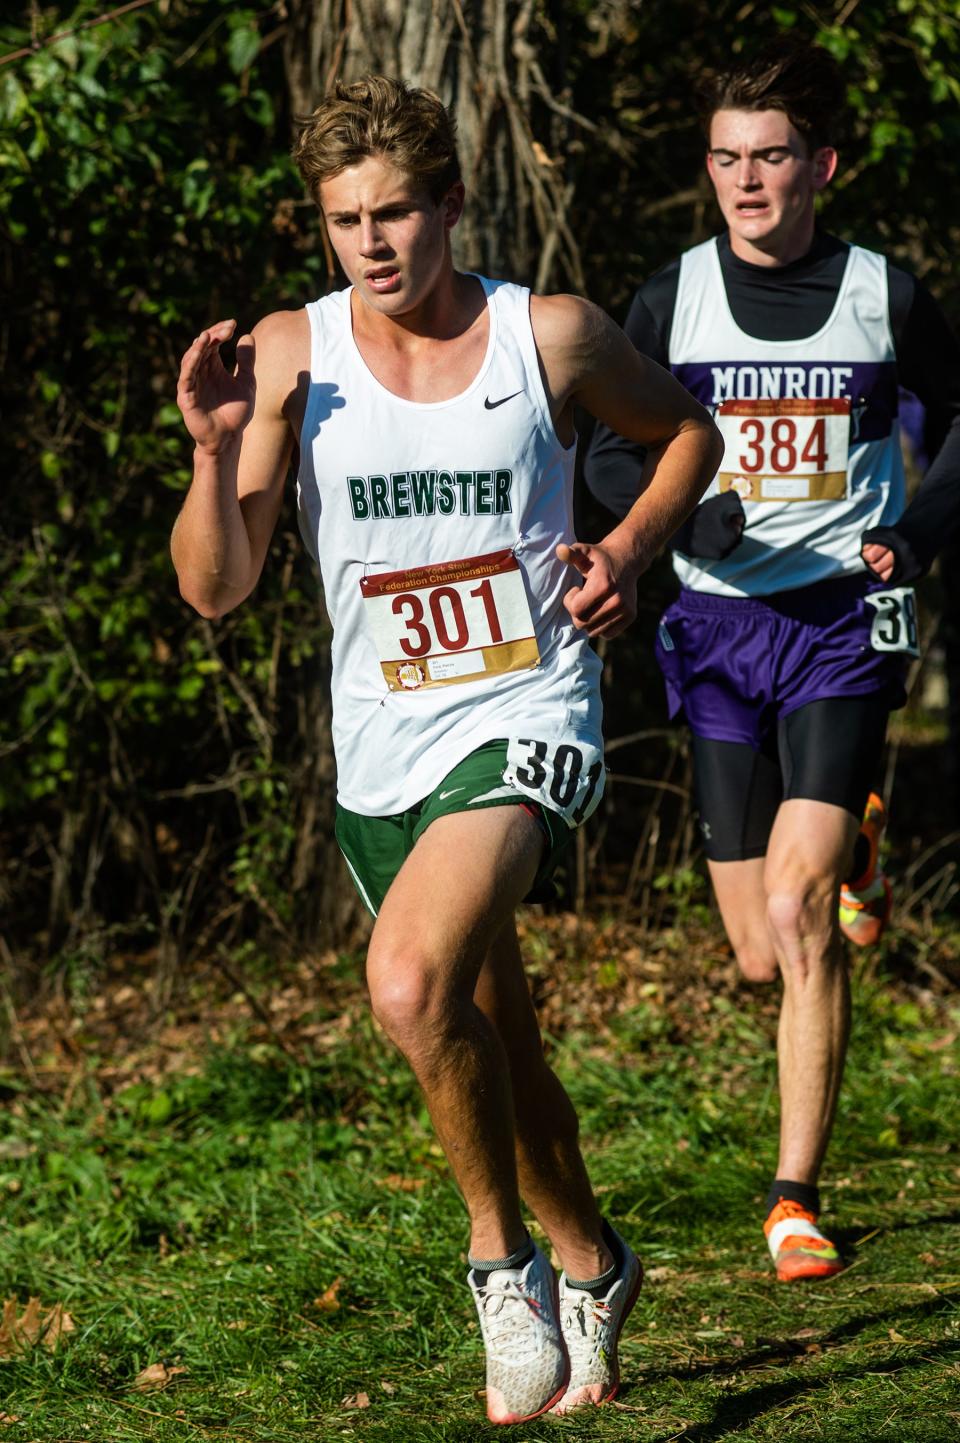 Brewster's Pat Ford runs the course, with Monroe-Woodbury's Collin Catherwood in tow during the state Federation championships at Bowdoin Park in Poughkeepsie on Saturday, November 19, 2022.